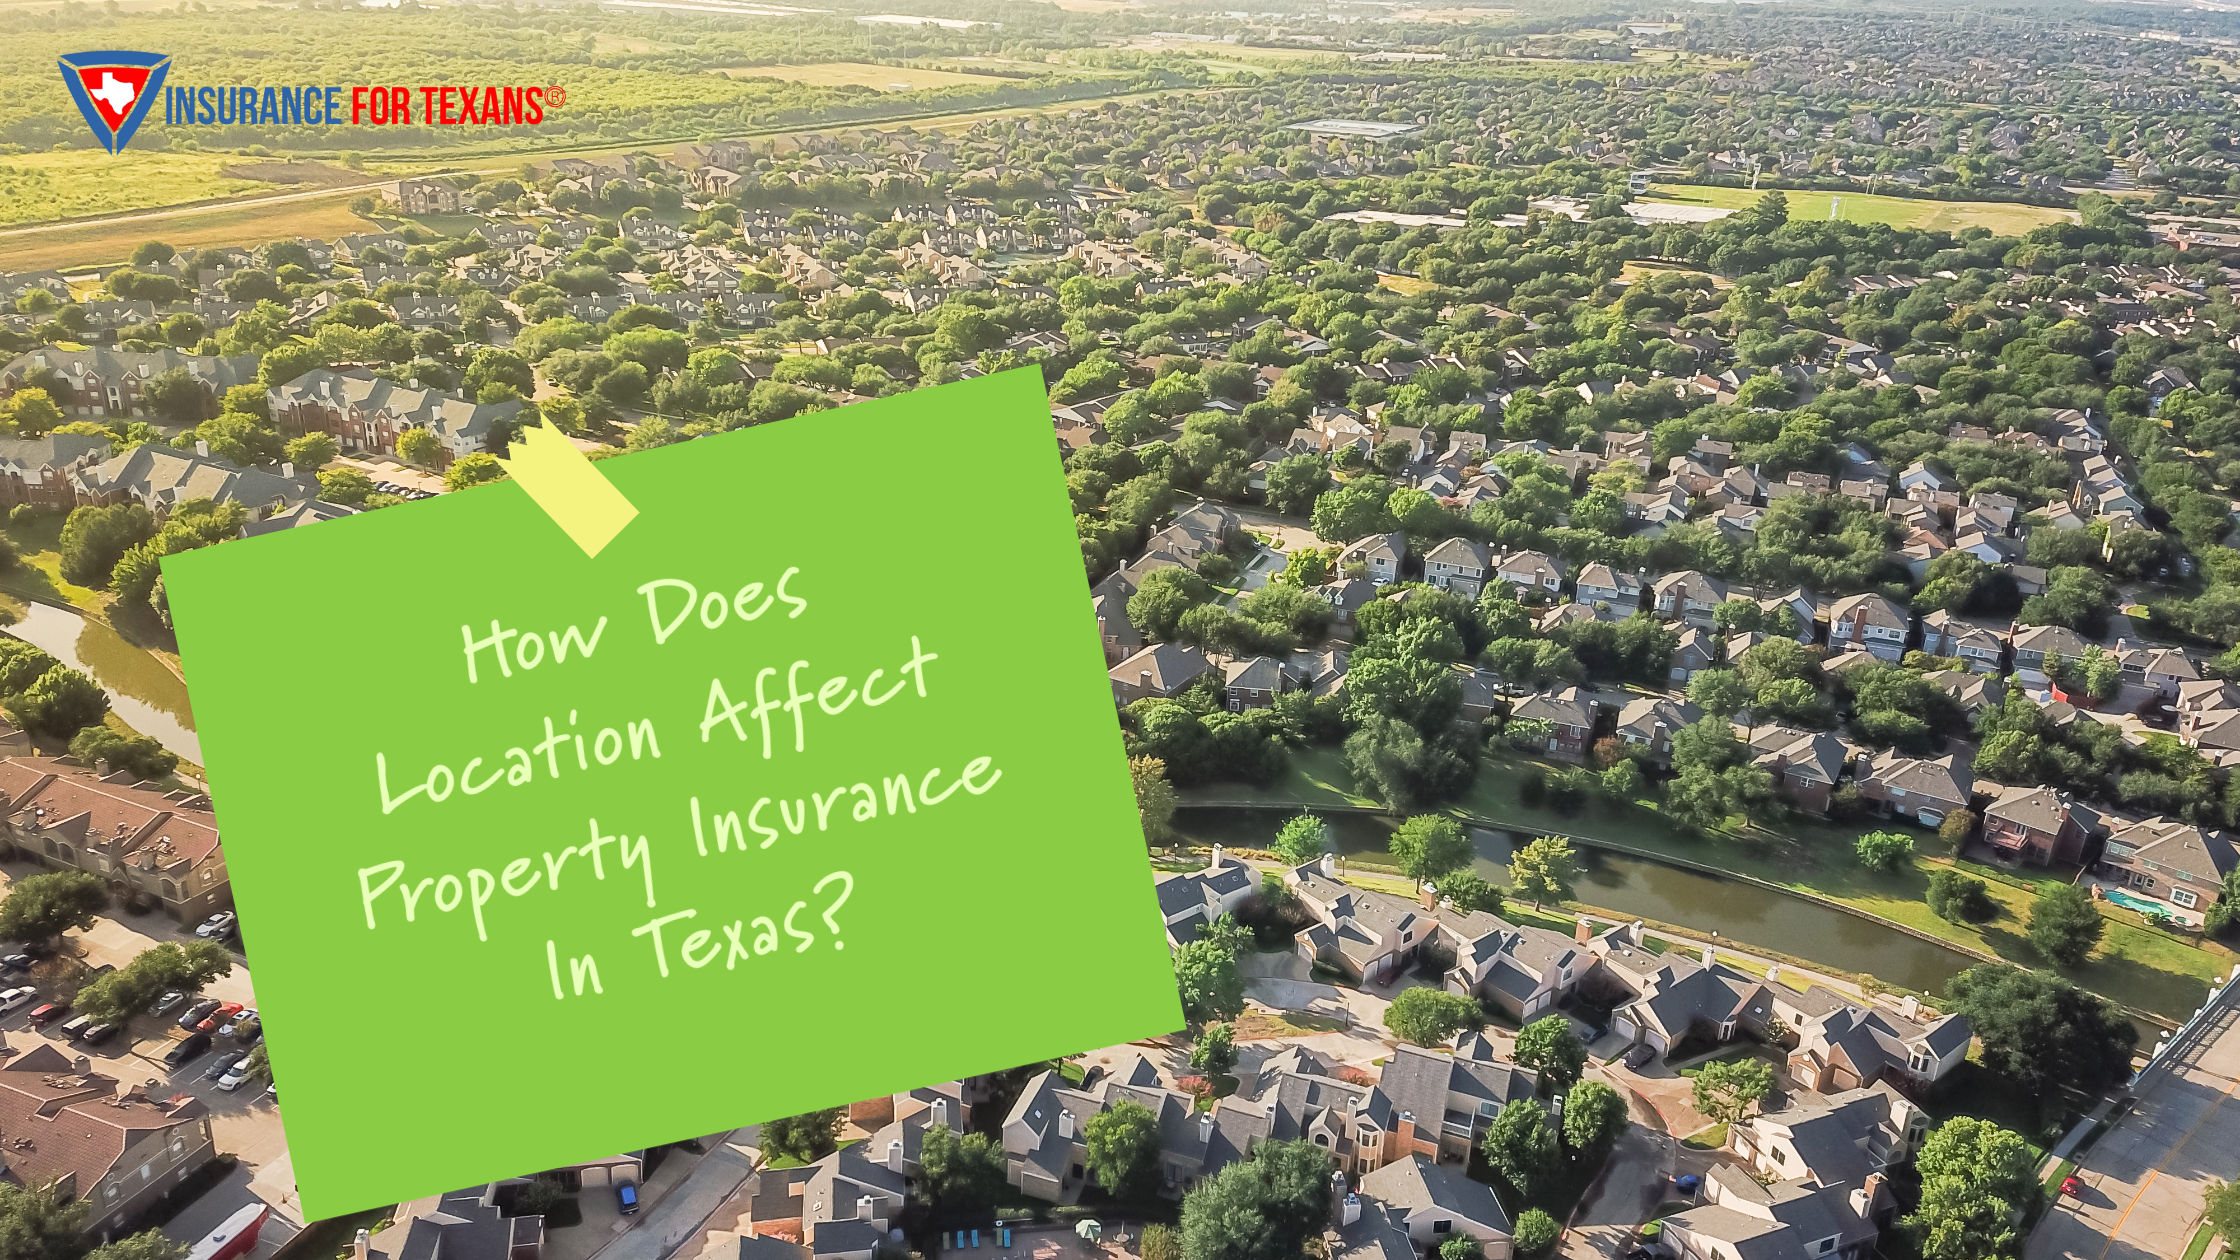 How Does Location Affect Property Insurance In Texas?